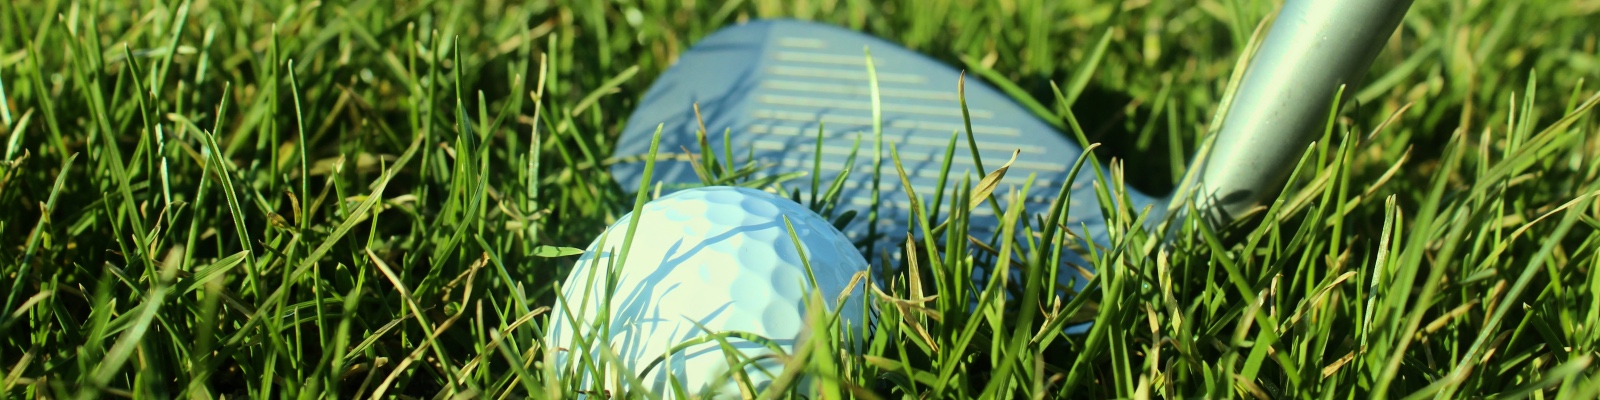 How to Put Backspin on a Golf Ball - Discover the 3 step formula